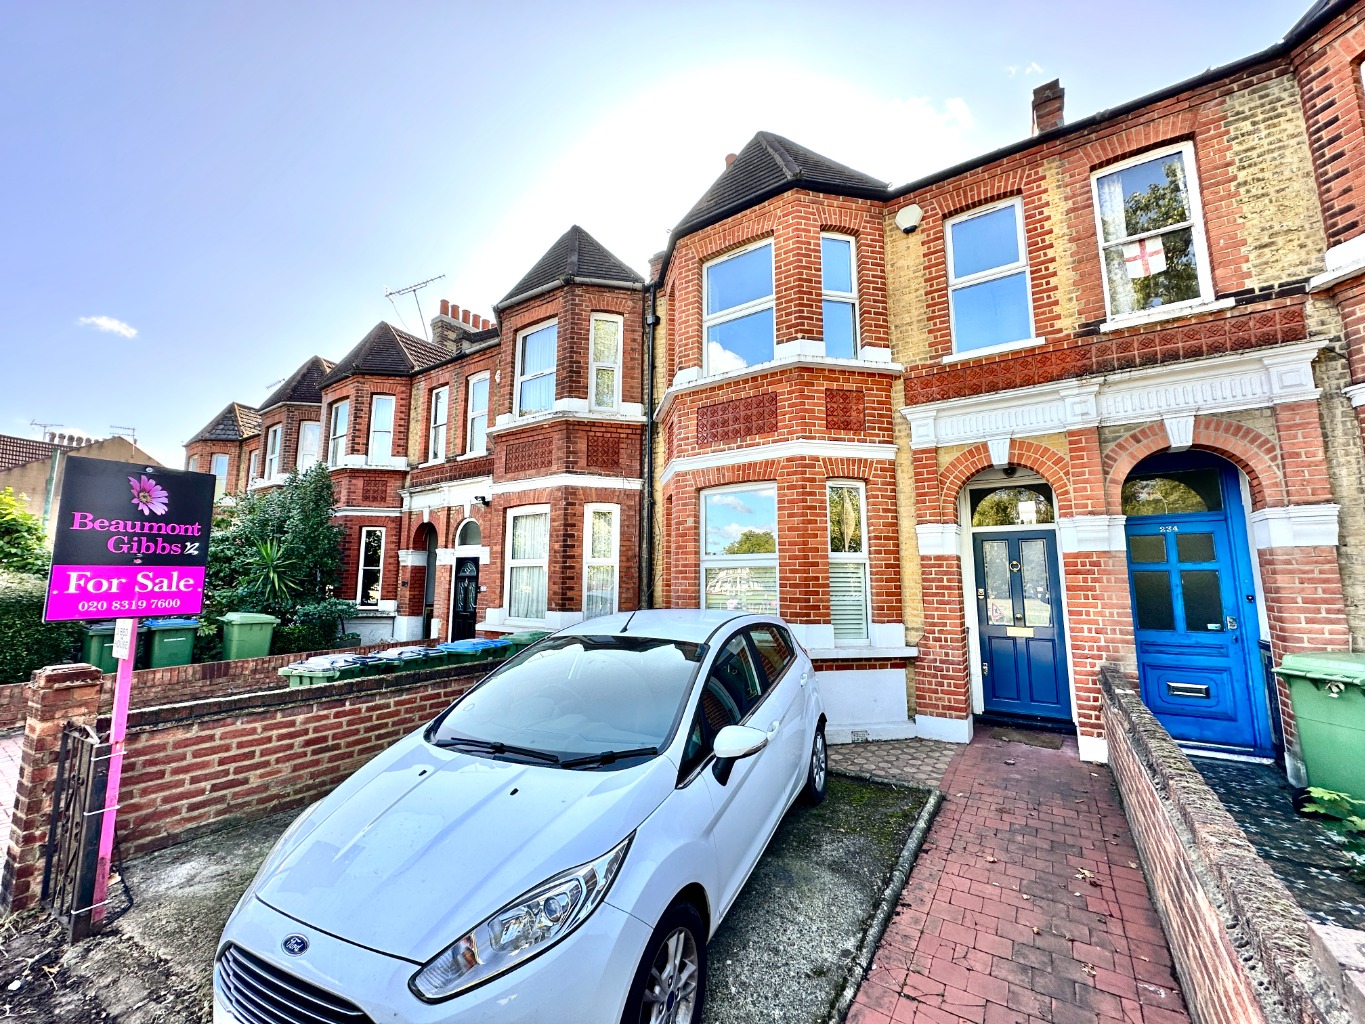 3 bed terraced house for sale in Plumstead - Property Image 1